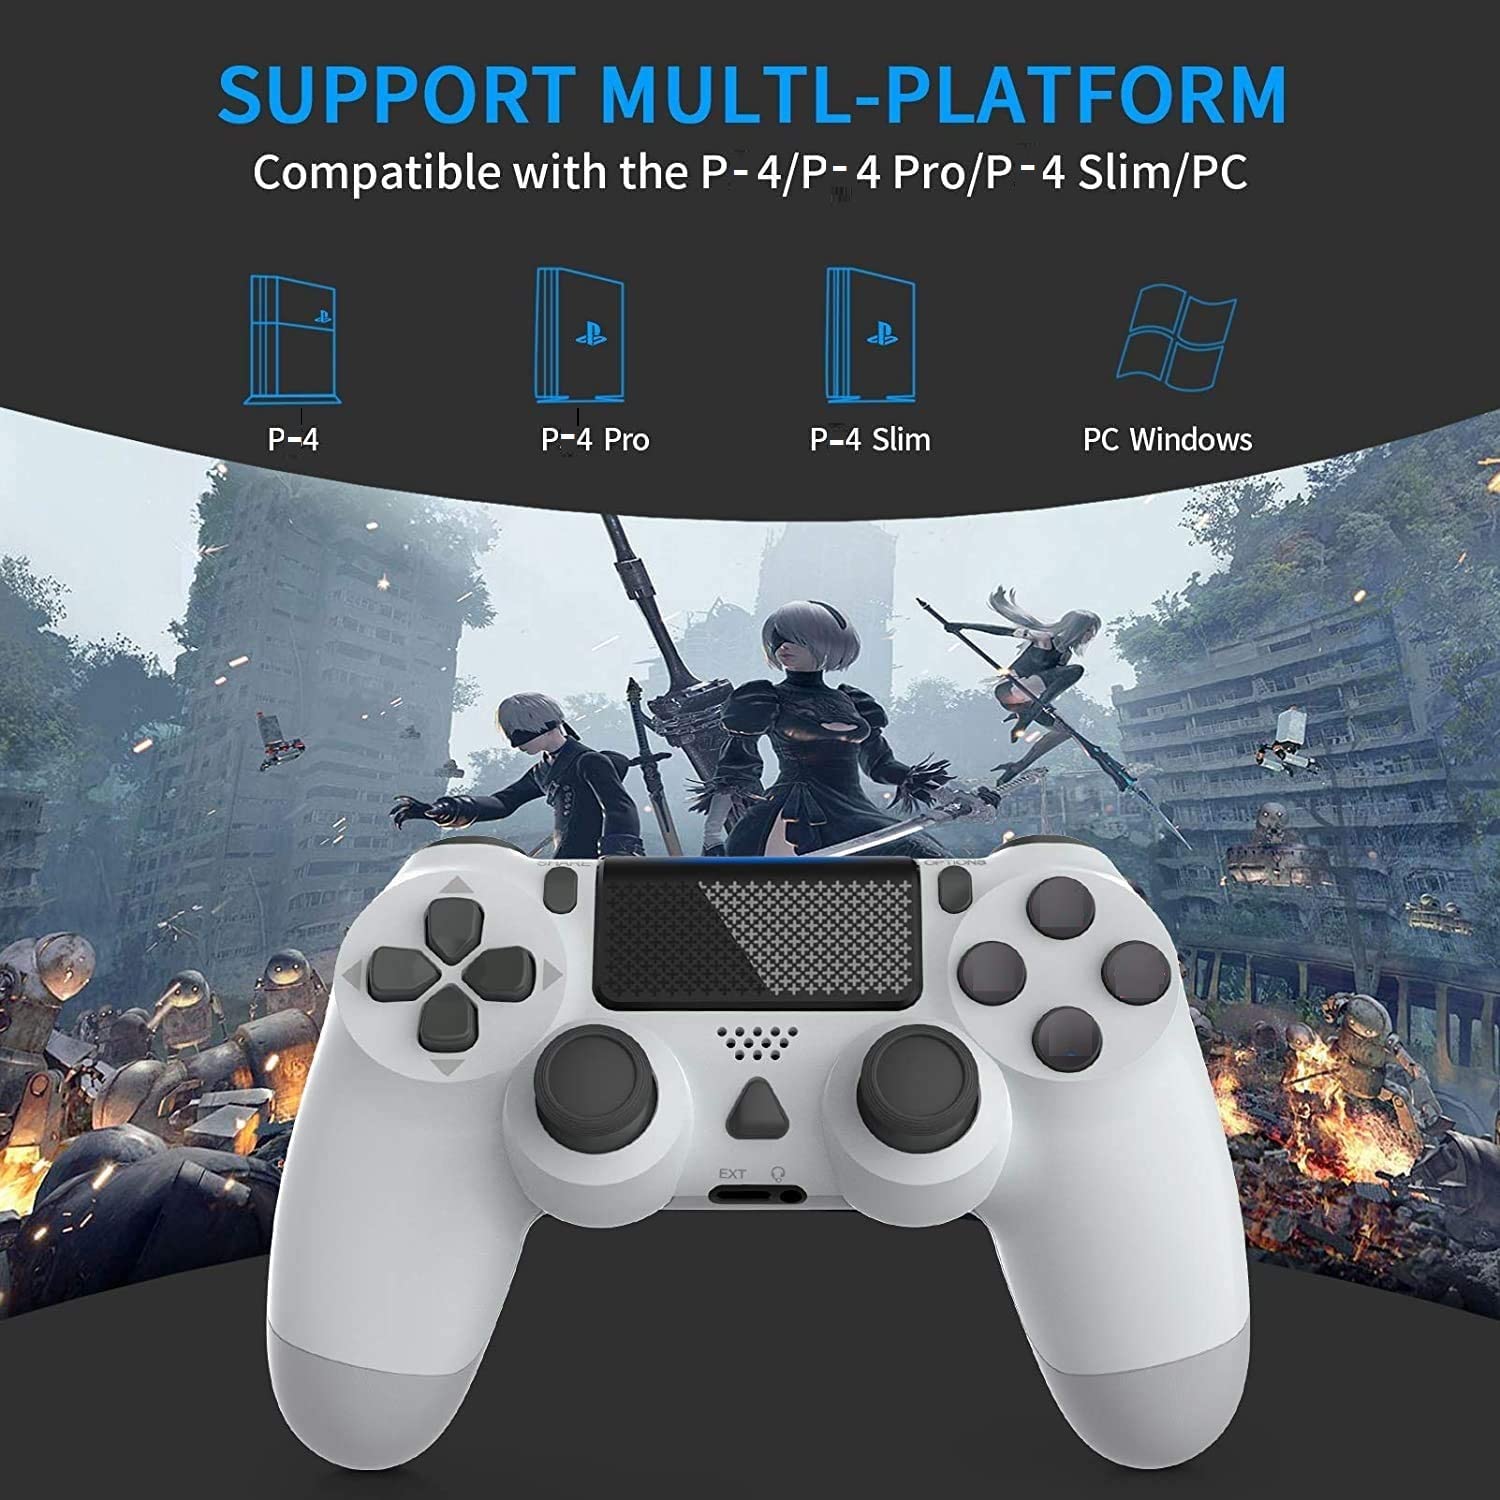 Rzzhgzq 2 Pack Wireless Controller for PS-4 Compatible with P4 /Pro/Slim Console with Charging Cable Wireless Joystick Gift for Kids,Son,Man(WHITE+CAMOUFLAGE)